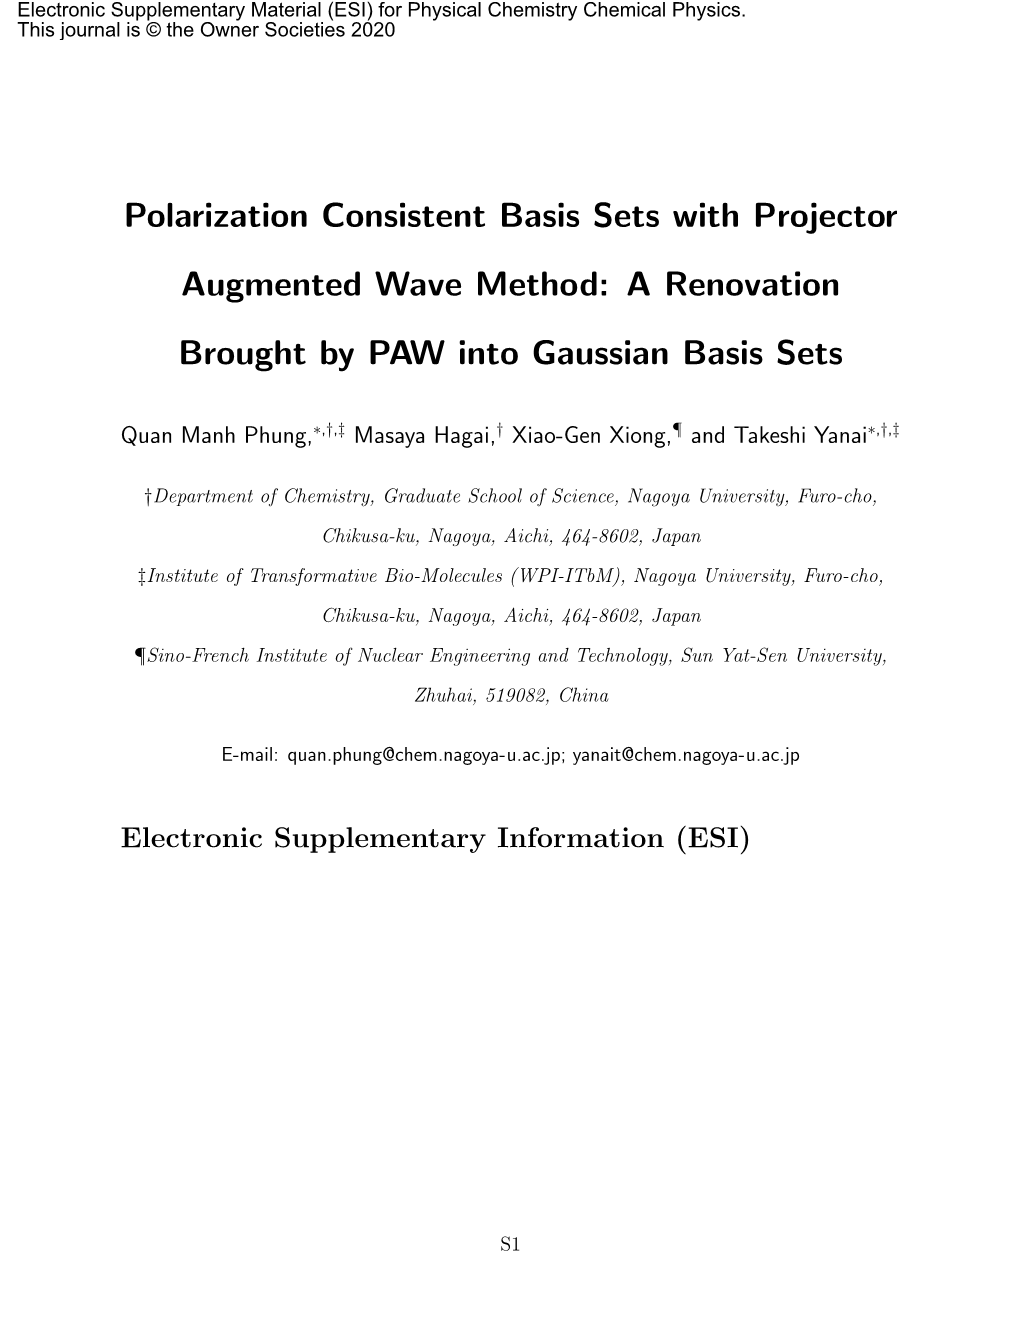 Polarization Consistent Basis Sets with Projector Augmented Wave Method: a Renovation Brought by PAW Into Gaussian Basis Sets